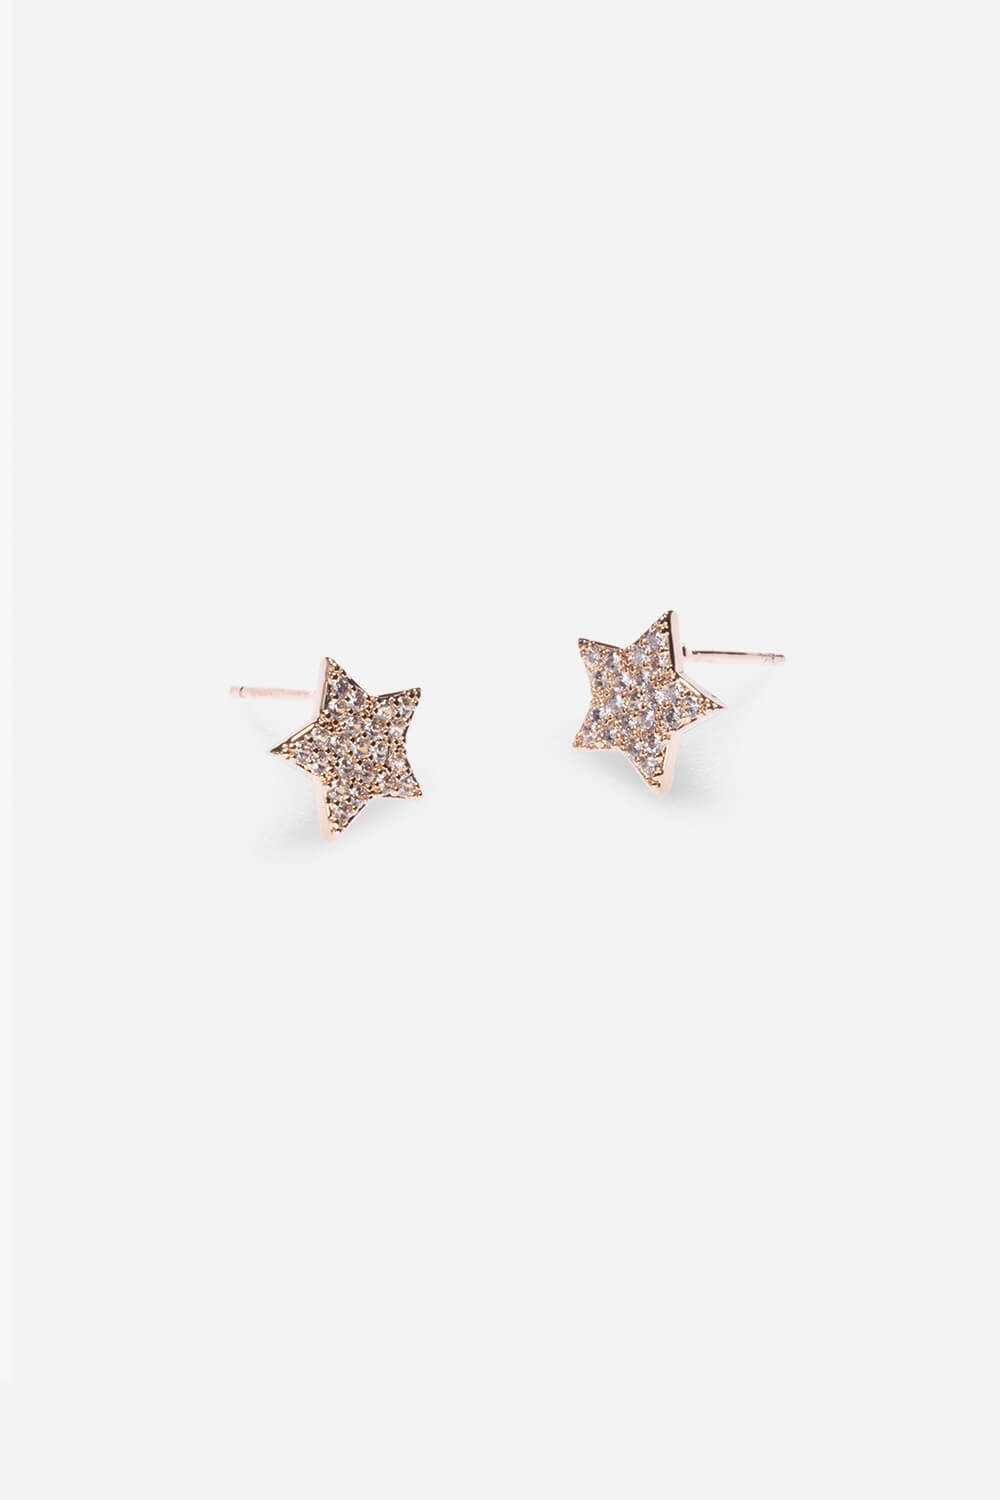 Rose Gold Stainless Steel Plated Star Earrings, Image 2 of 2